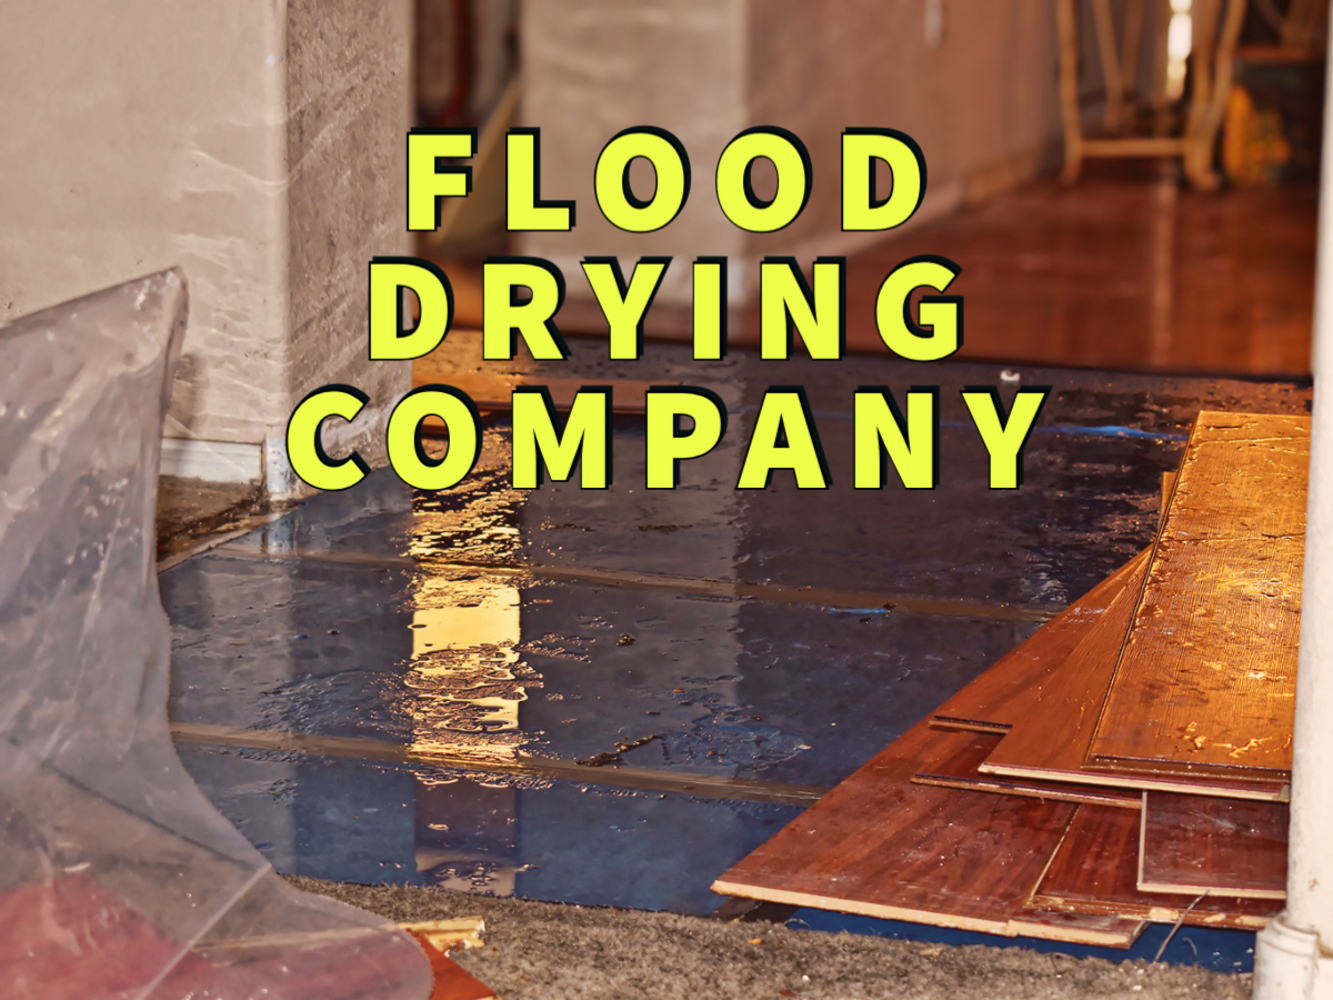 Flood drying company written in yellow over water damaged hardwood floors